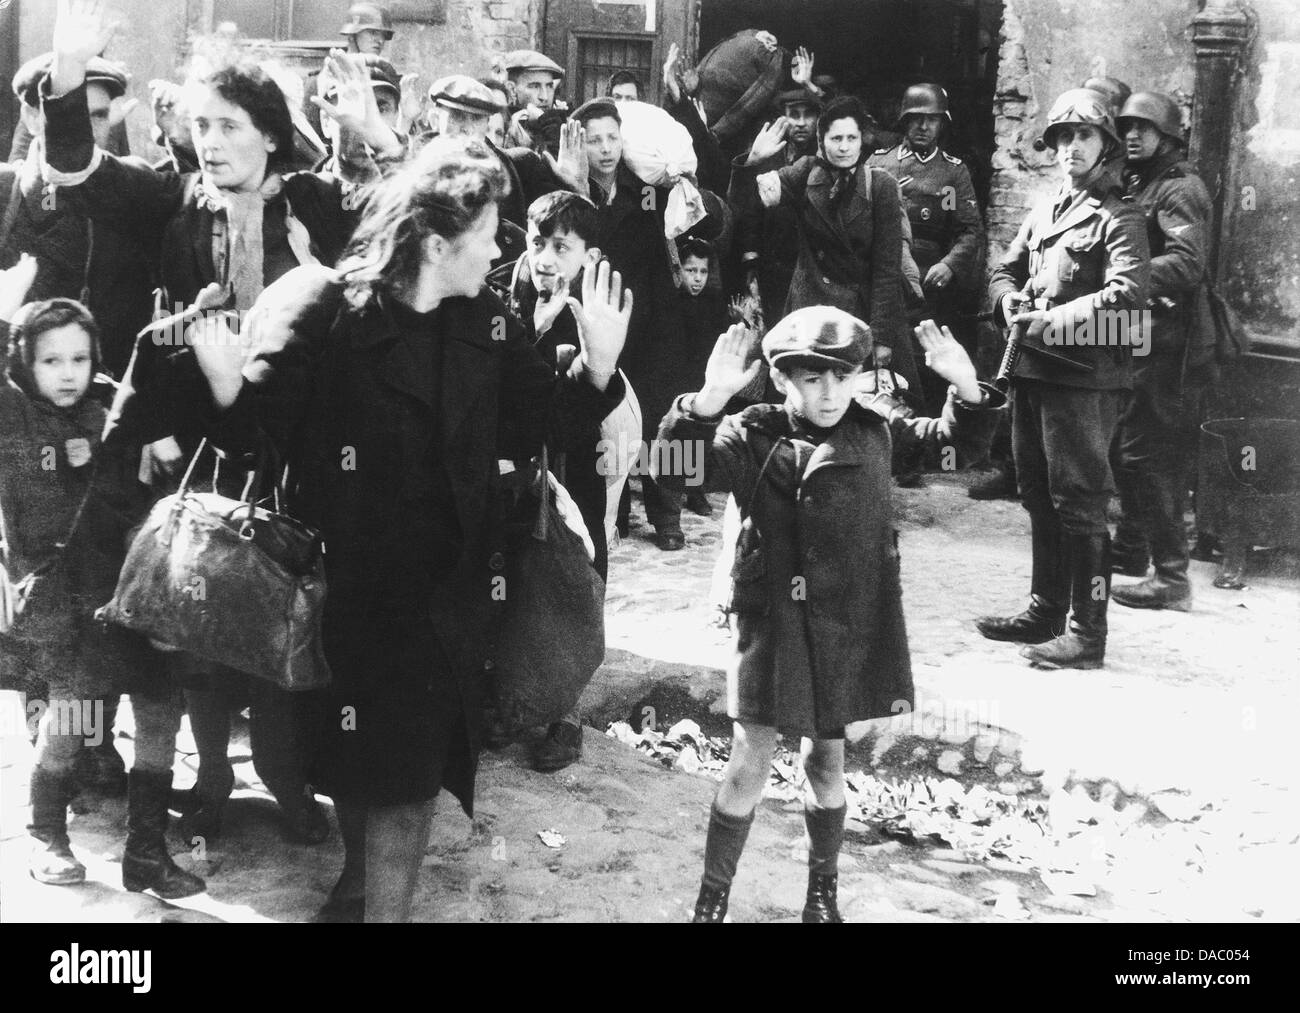 WARSAW GHETTO UPRISING 1943. A photo from Jurgen Stroop's report to Himmler in May 1943 Stock Photo